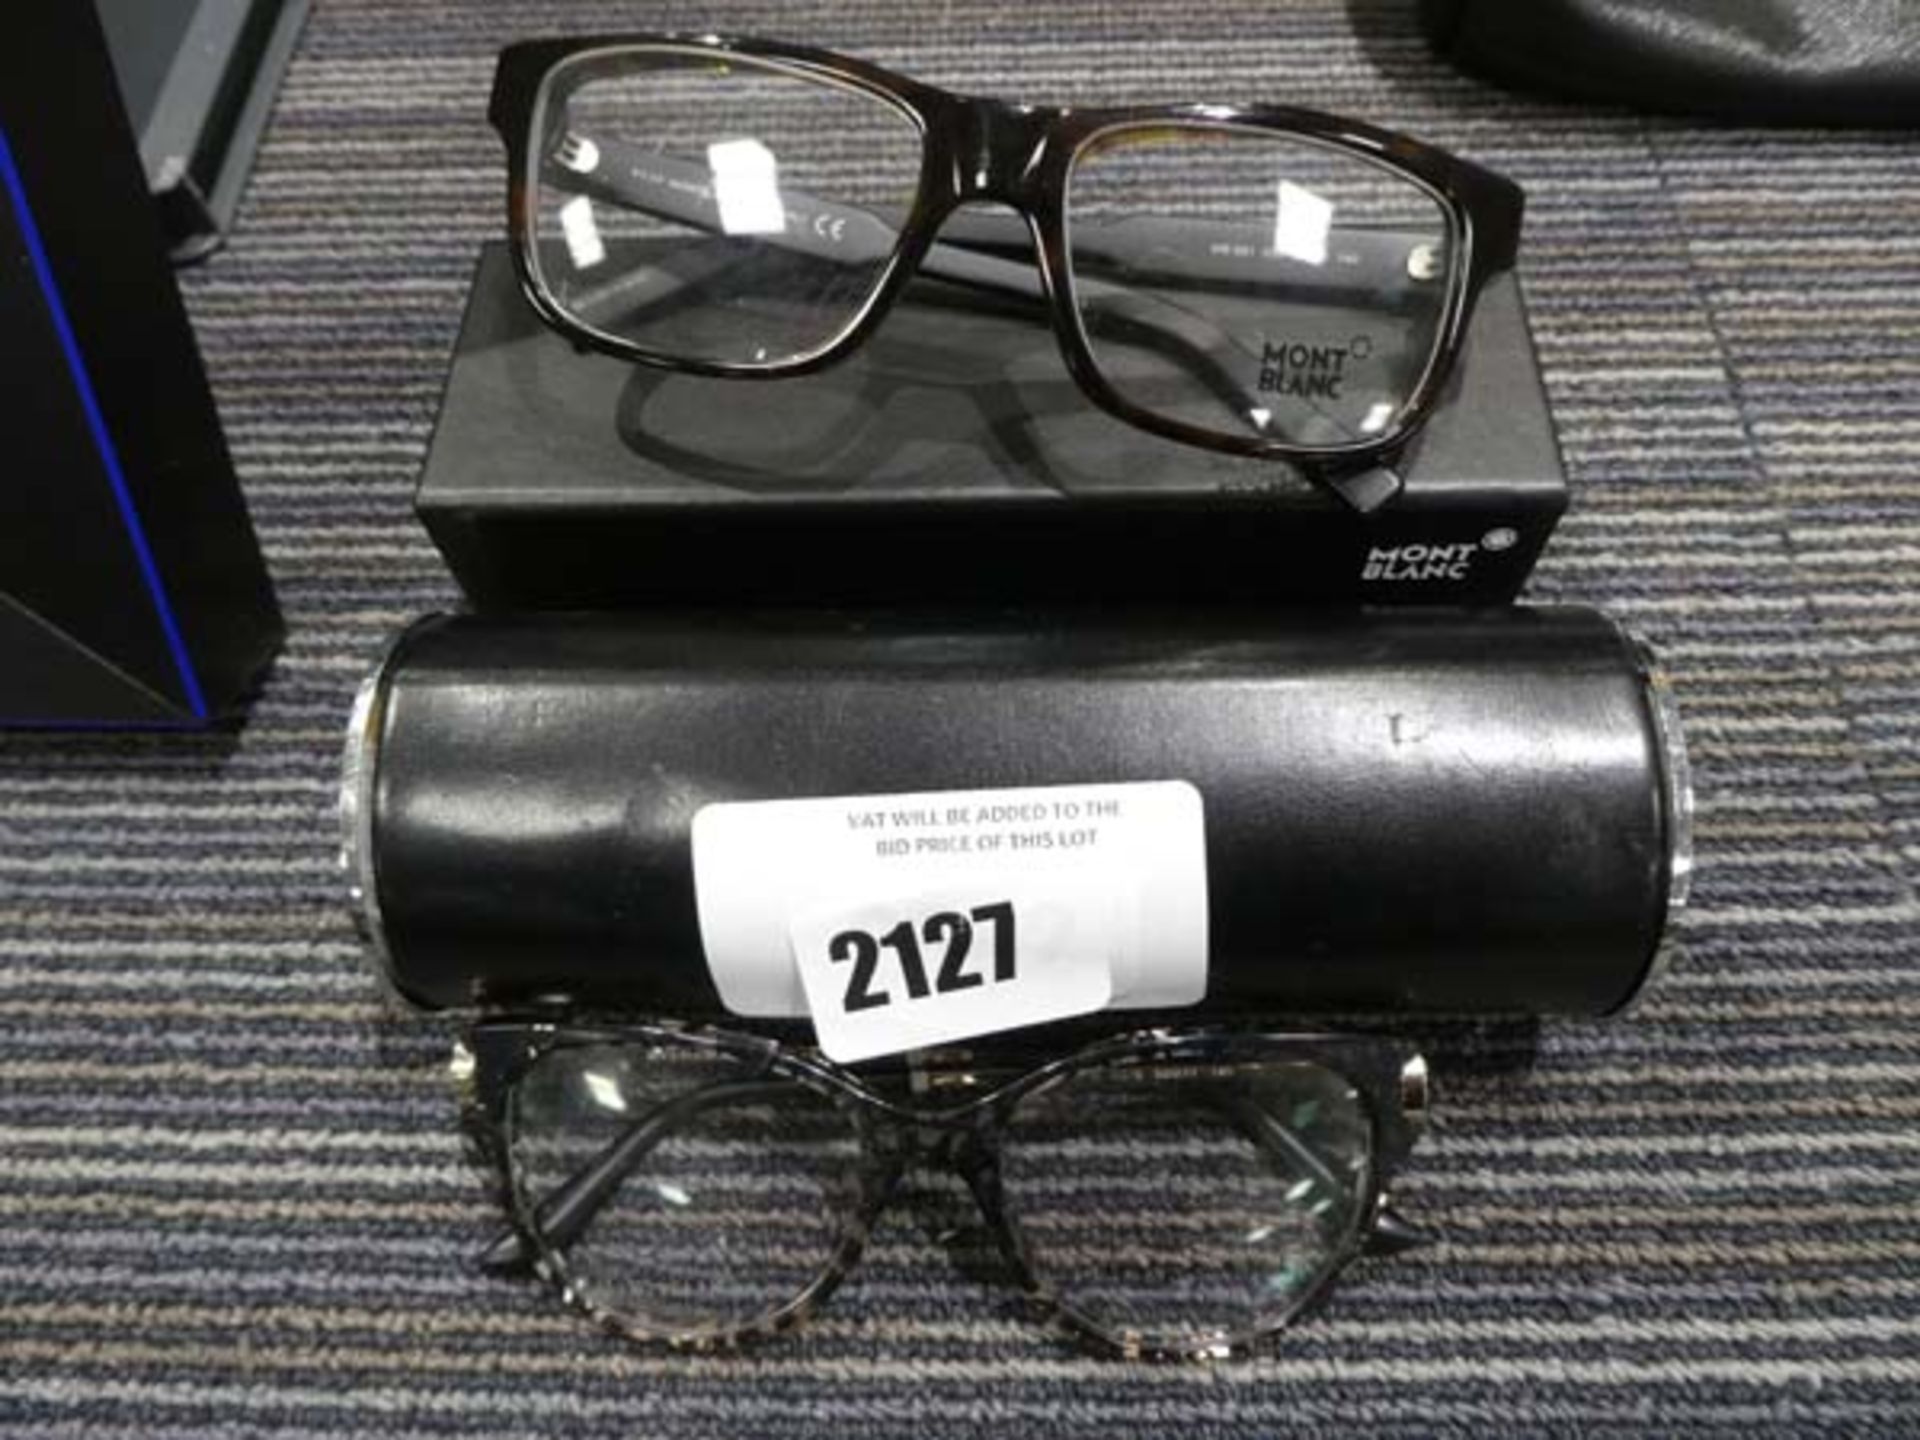 2082 Pair of Mont Blanc reading glasses together with BVLGARI reading glass frames in cases